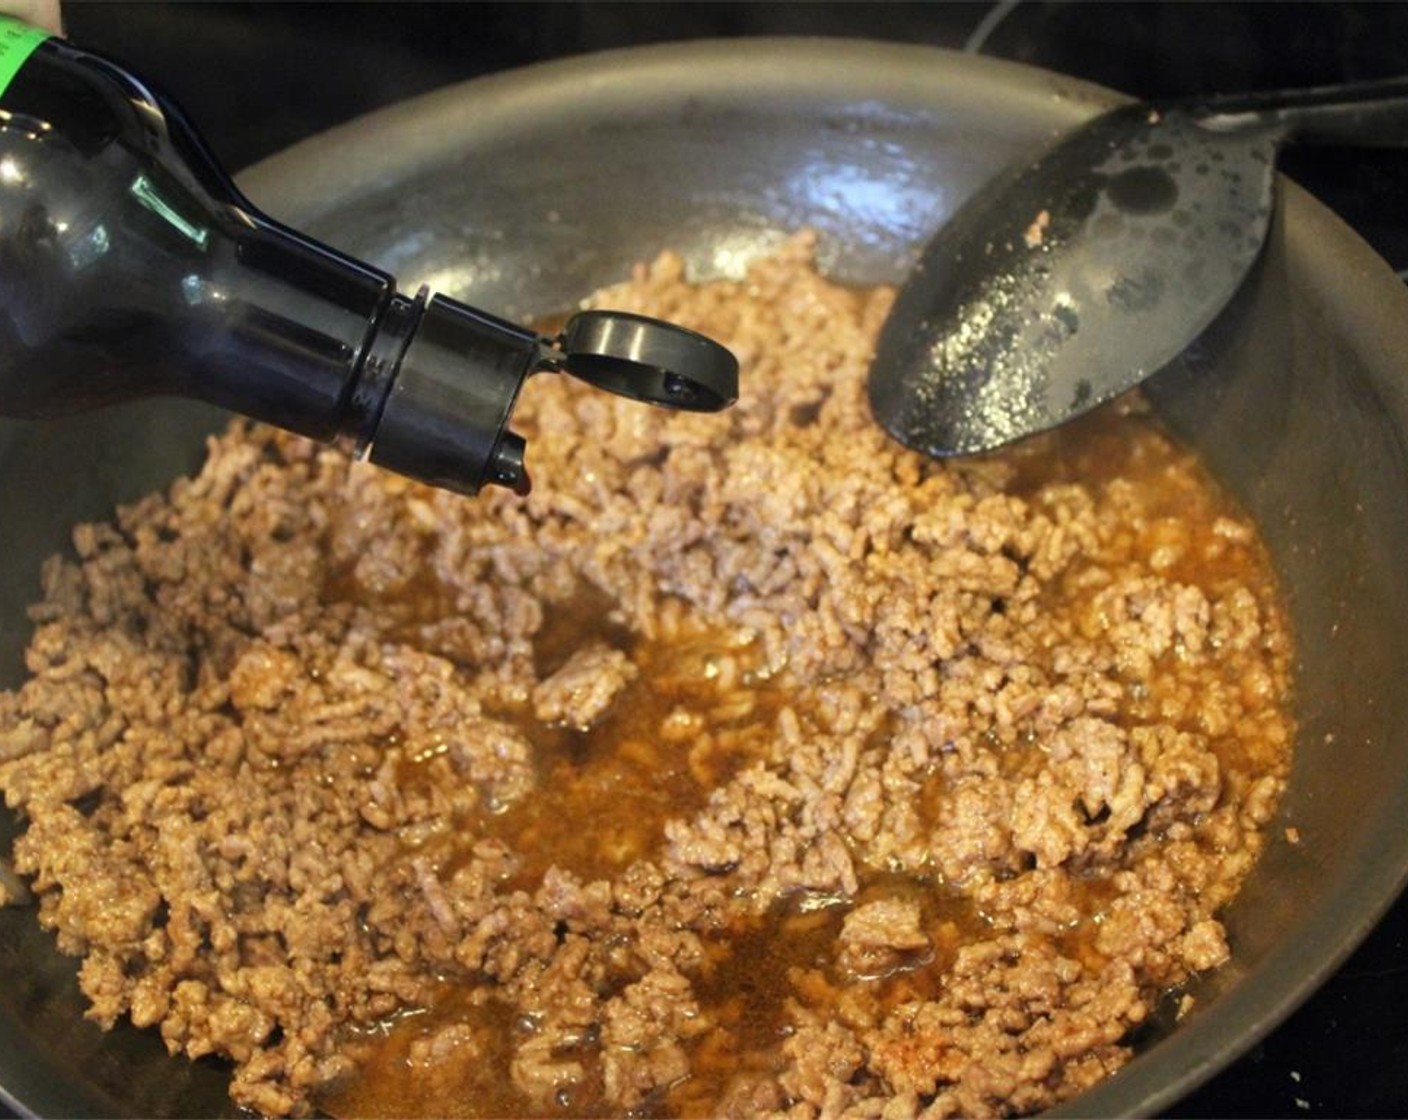 step 4 Taste the meat, and add Soy Sauce (1 tsp). Add more teaspoons as desired. Reduce the heat to medium-low, and let the meat simmer for 5 to 10 minutes until the water is partially reduced and the meat is cooked through. If it gets too dry, add a little more water.